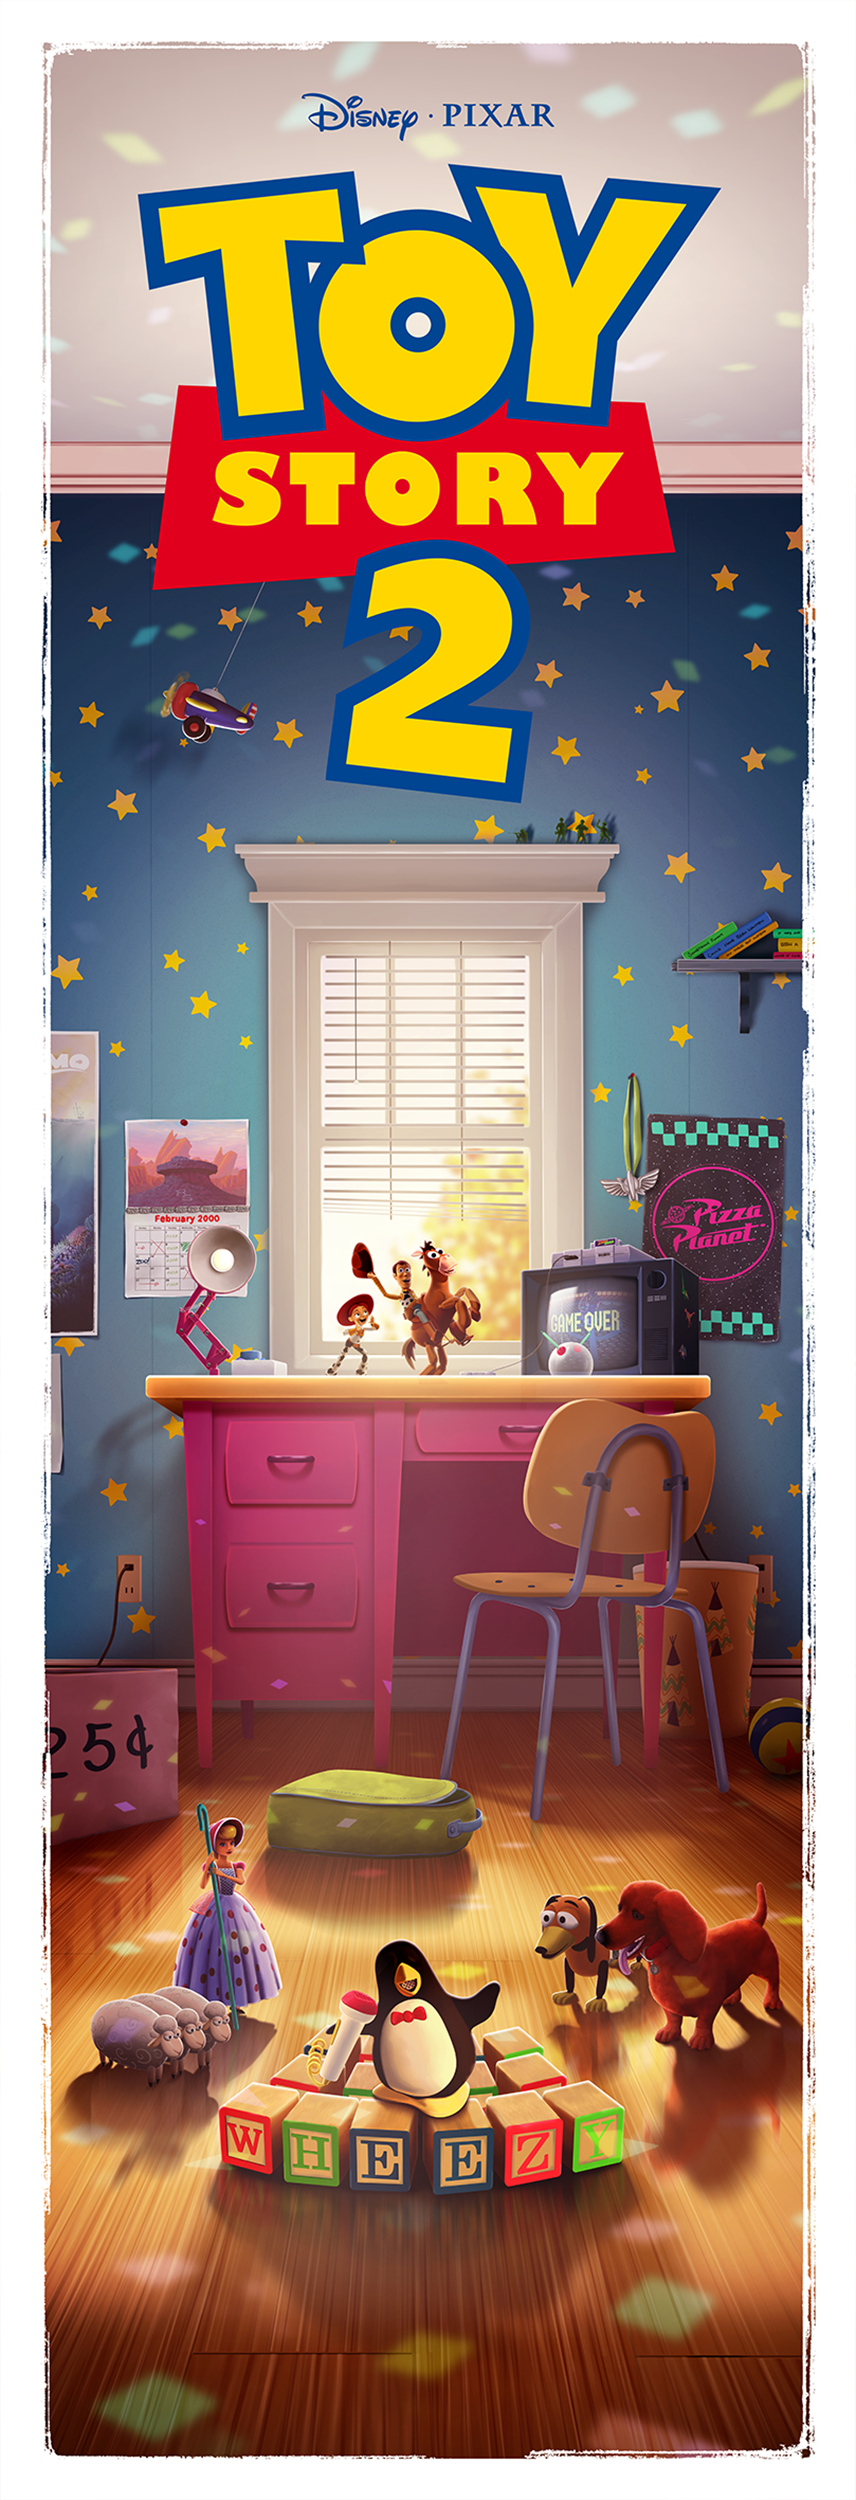 Ben Harman "Toy Story 2 (Day)"